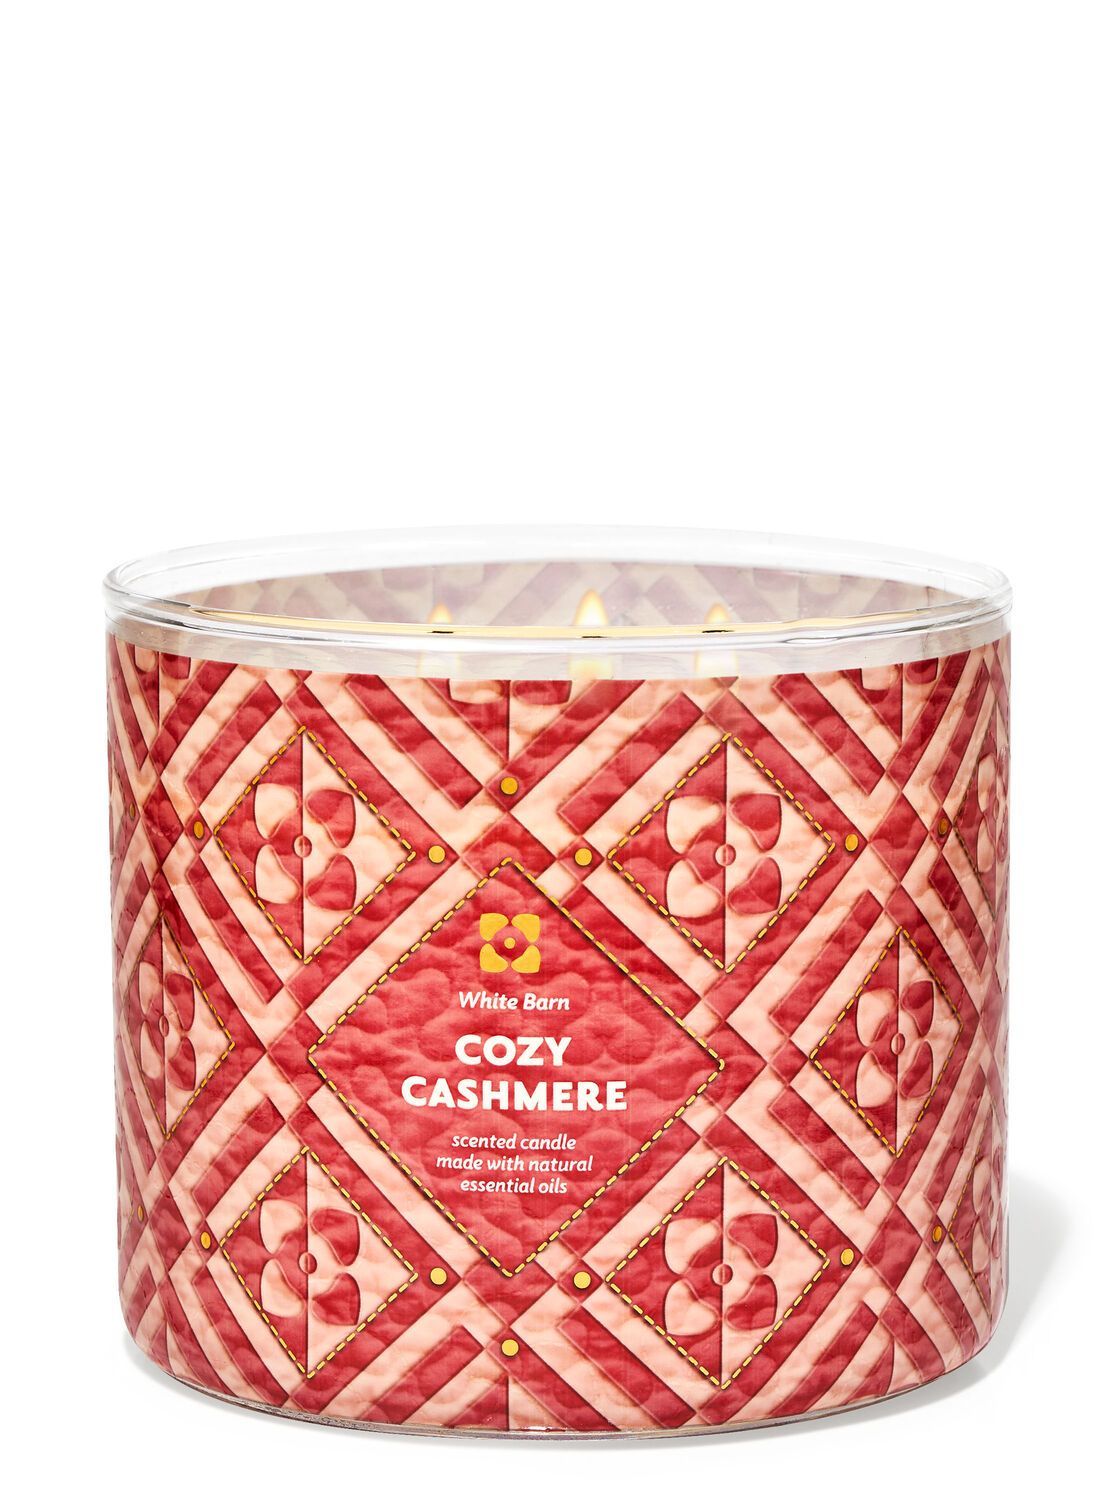 Cocoa Butter Cashmere Pure Beeswax Candle – The Bath and Wick Shop